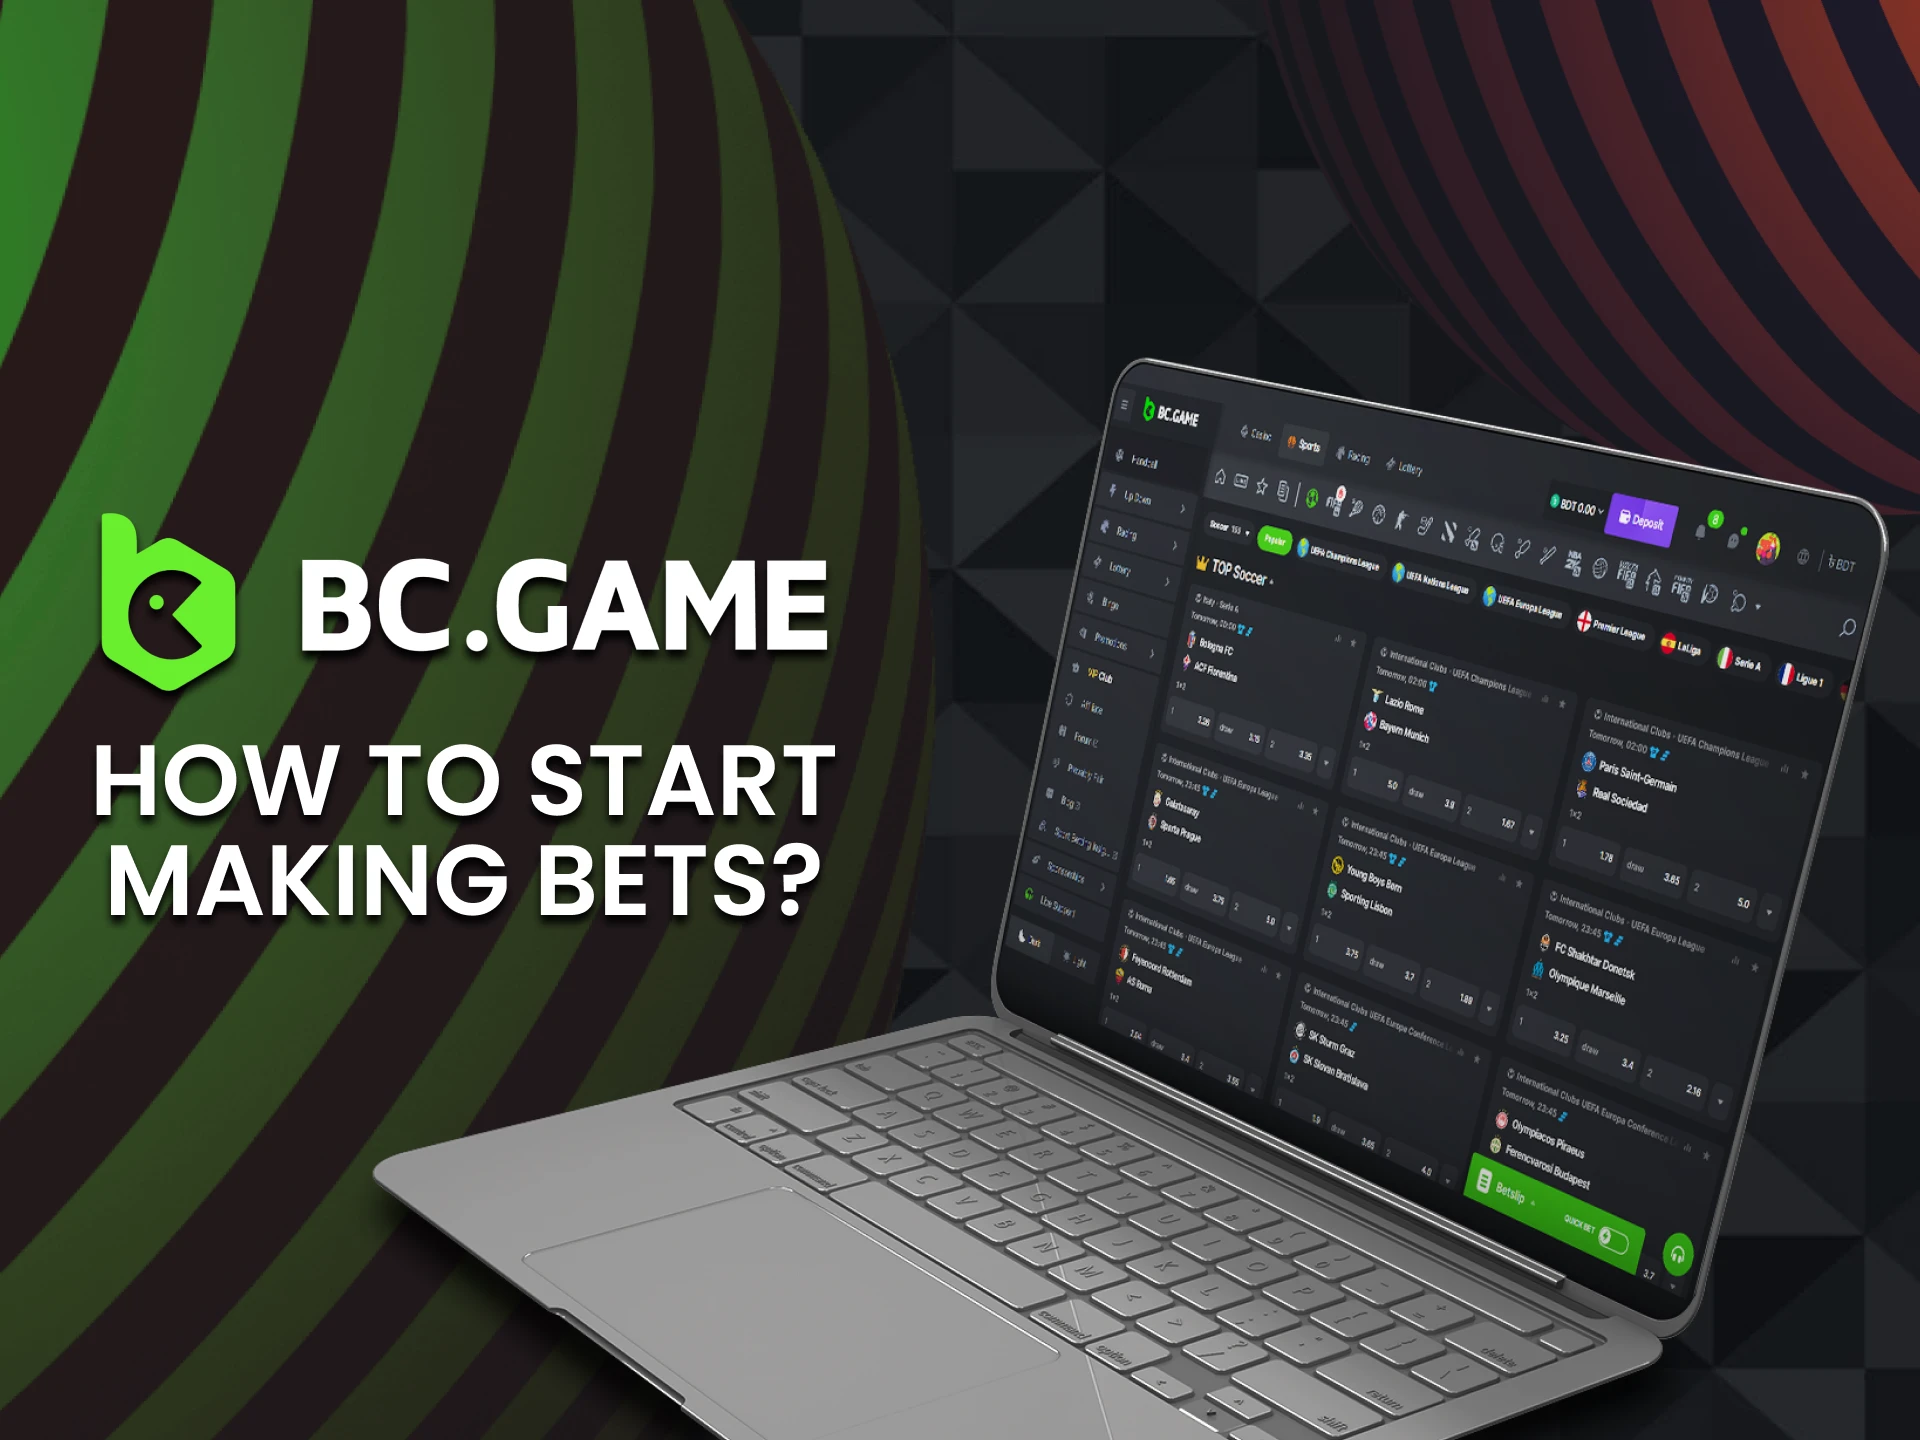 Go to the sports section to start football betting at BC Game.